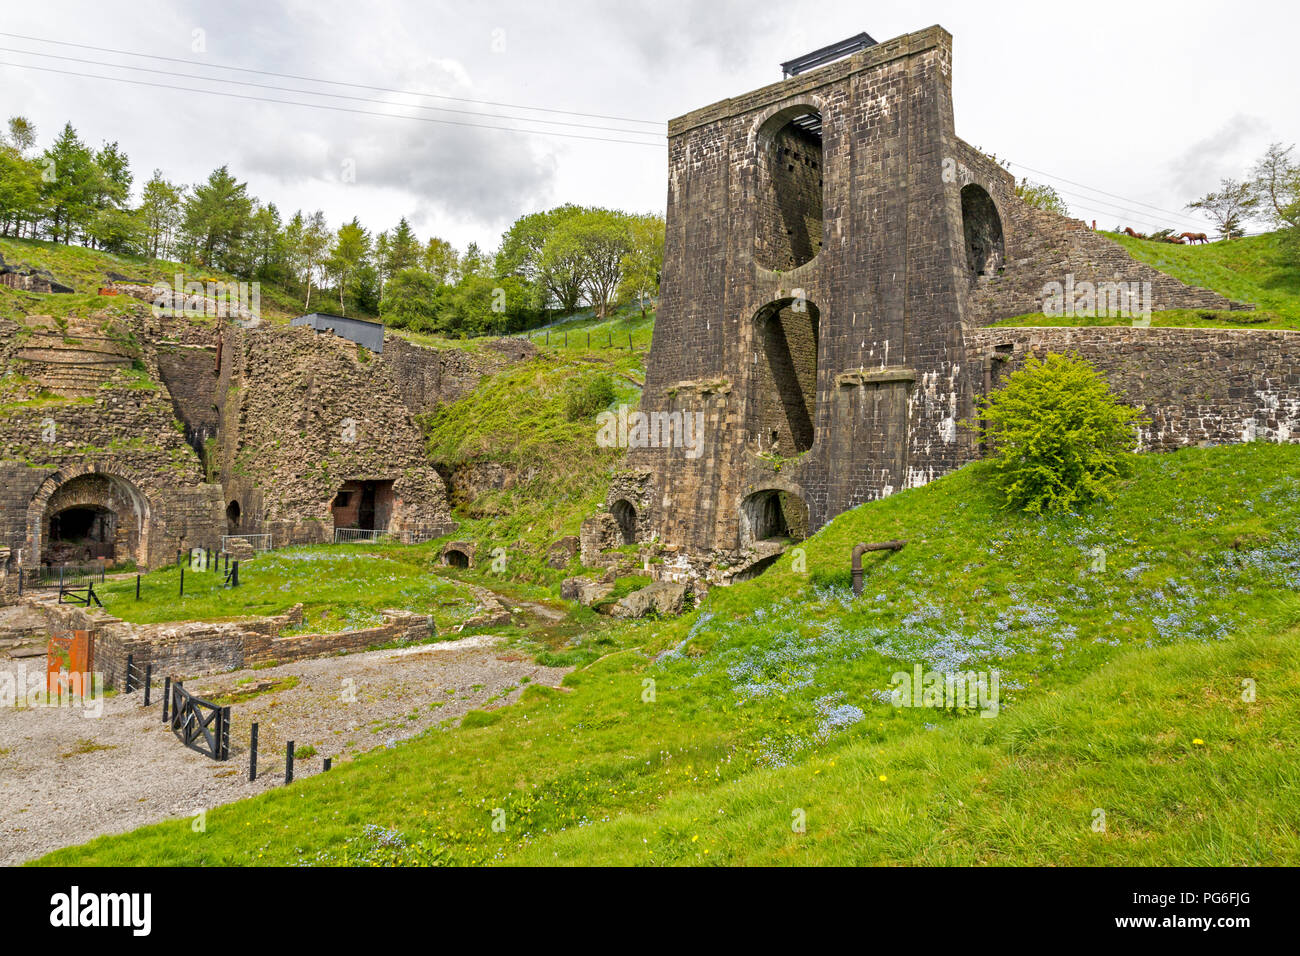 The massive water balance tower and blast furnaces at Blaenavon Ironworks, now a museum and UNESCO World Heritage Site in Blaenavon, Gwent, Wales, UK Stock Photo